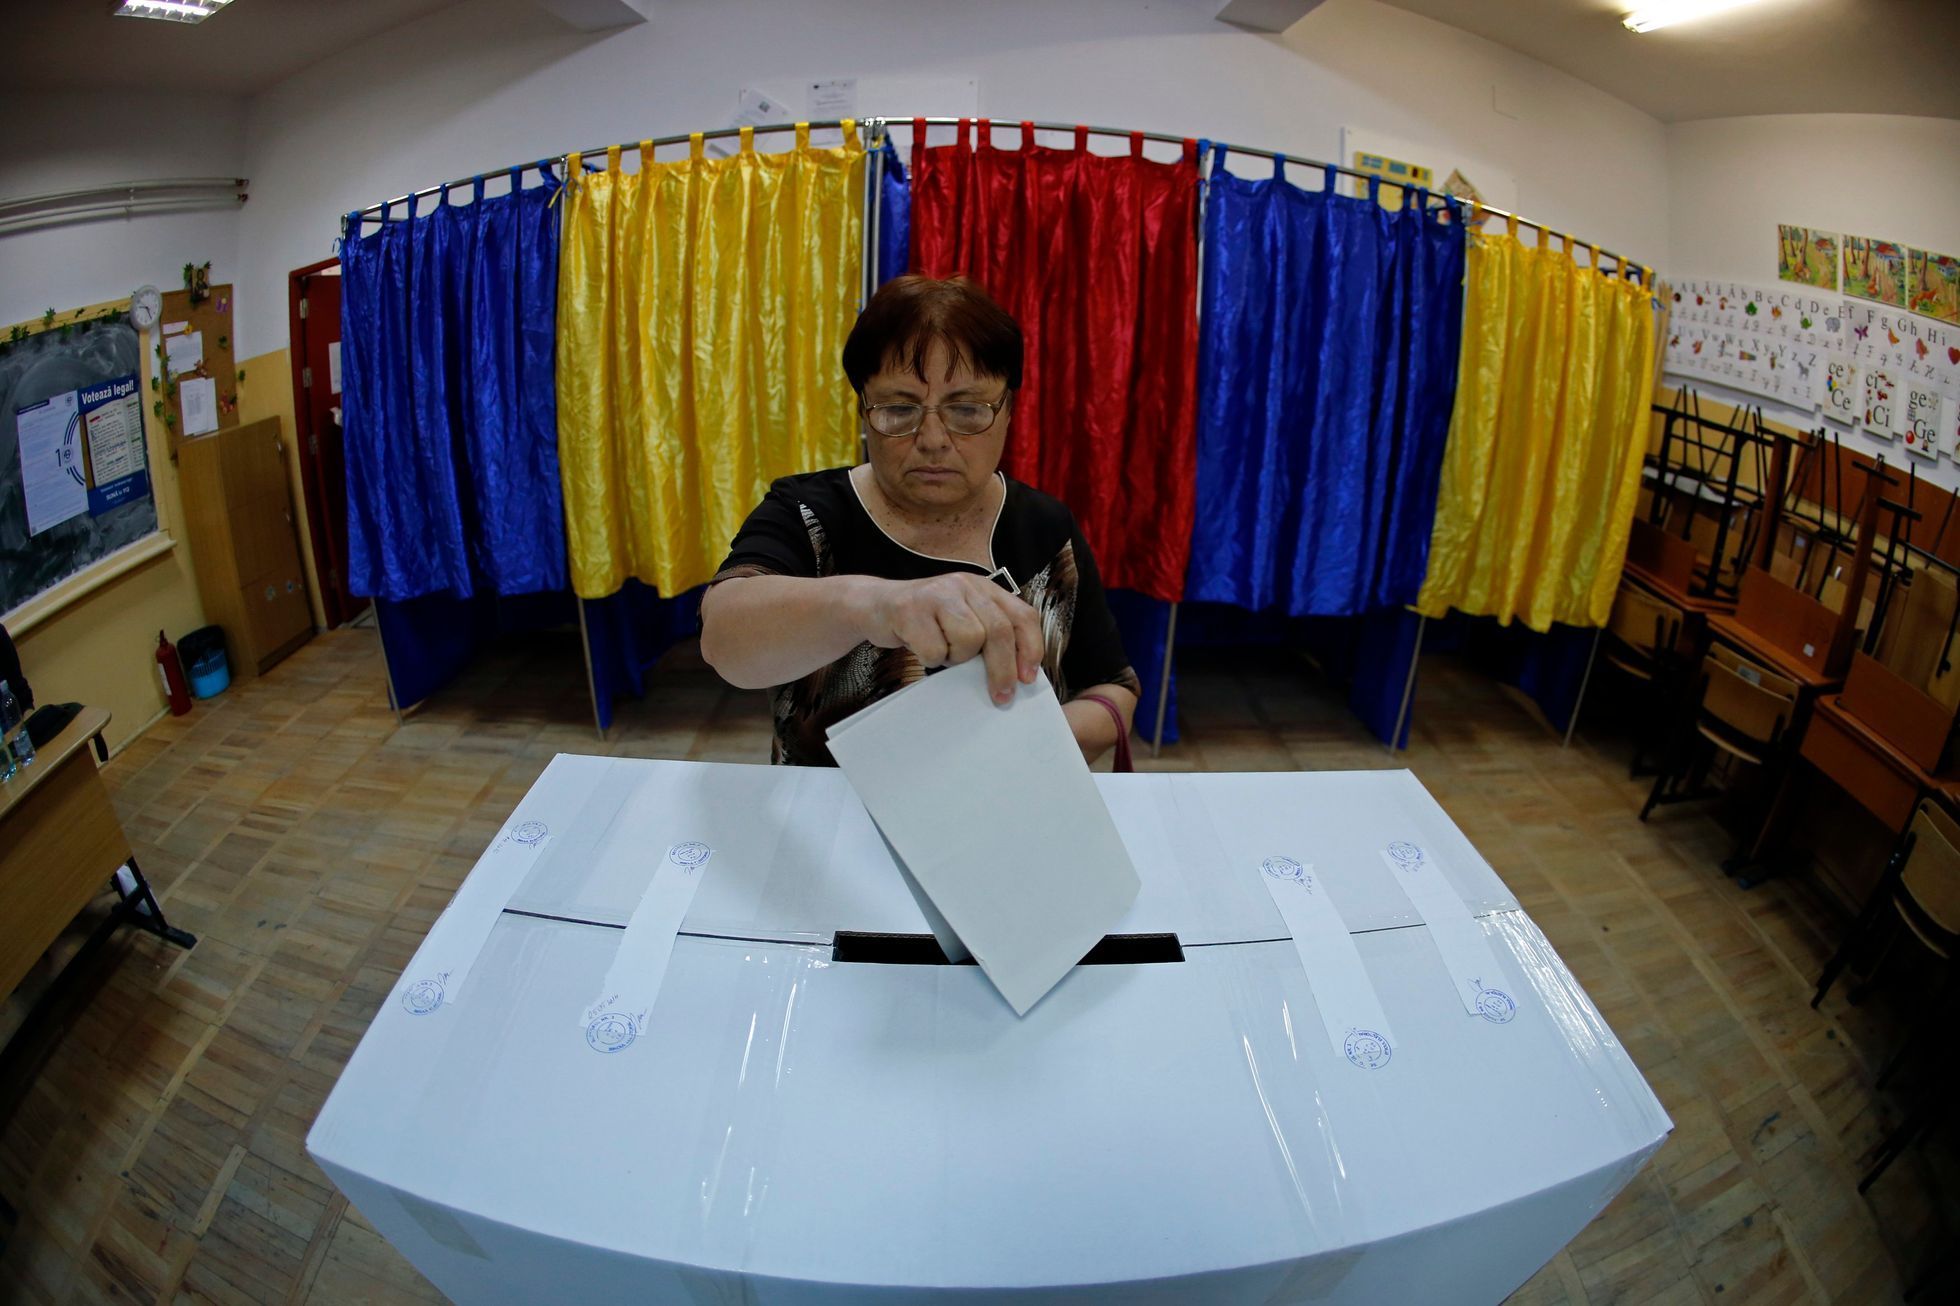 A woman casts her vote at a polling station in Bucharest